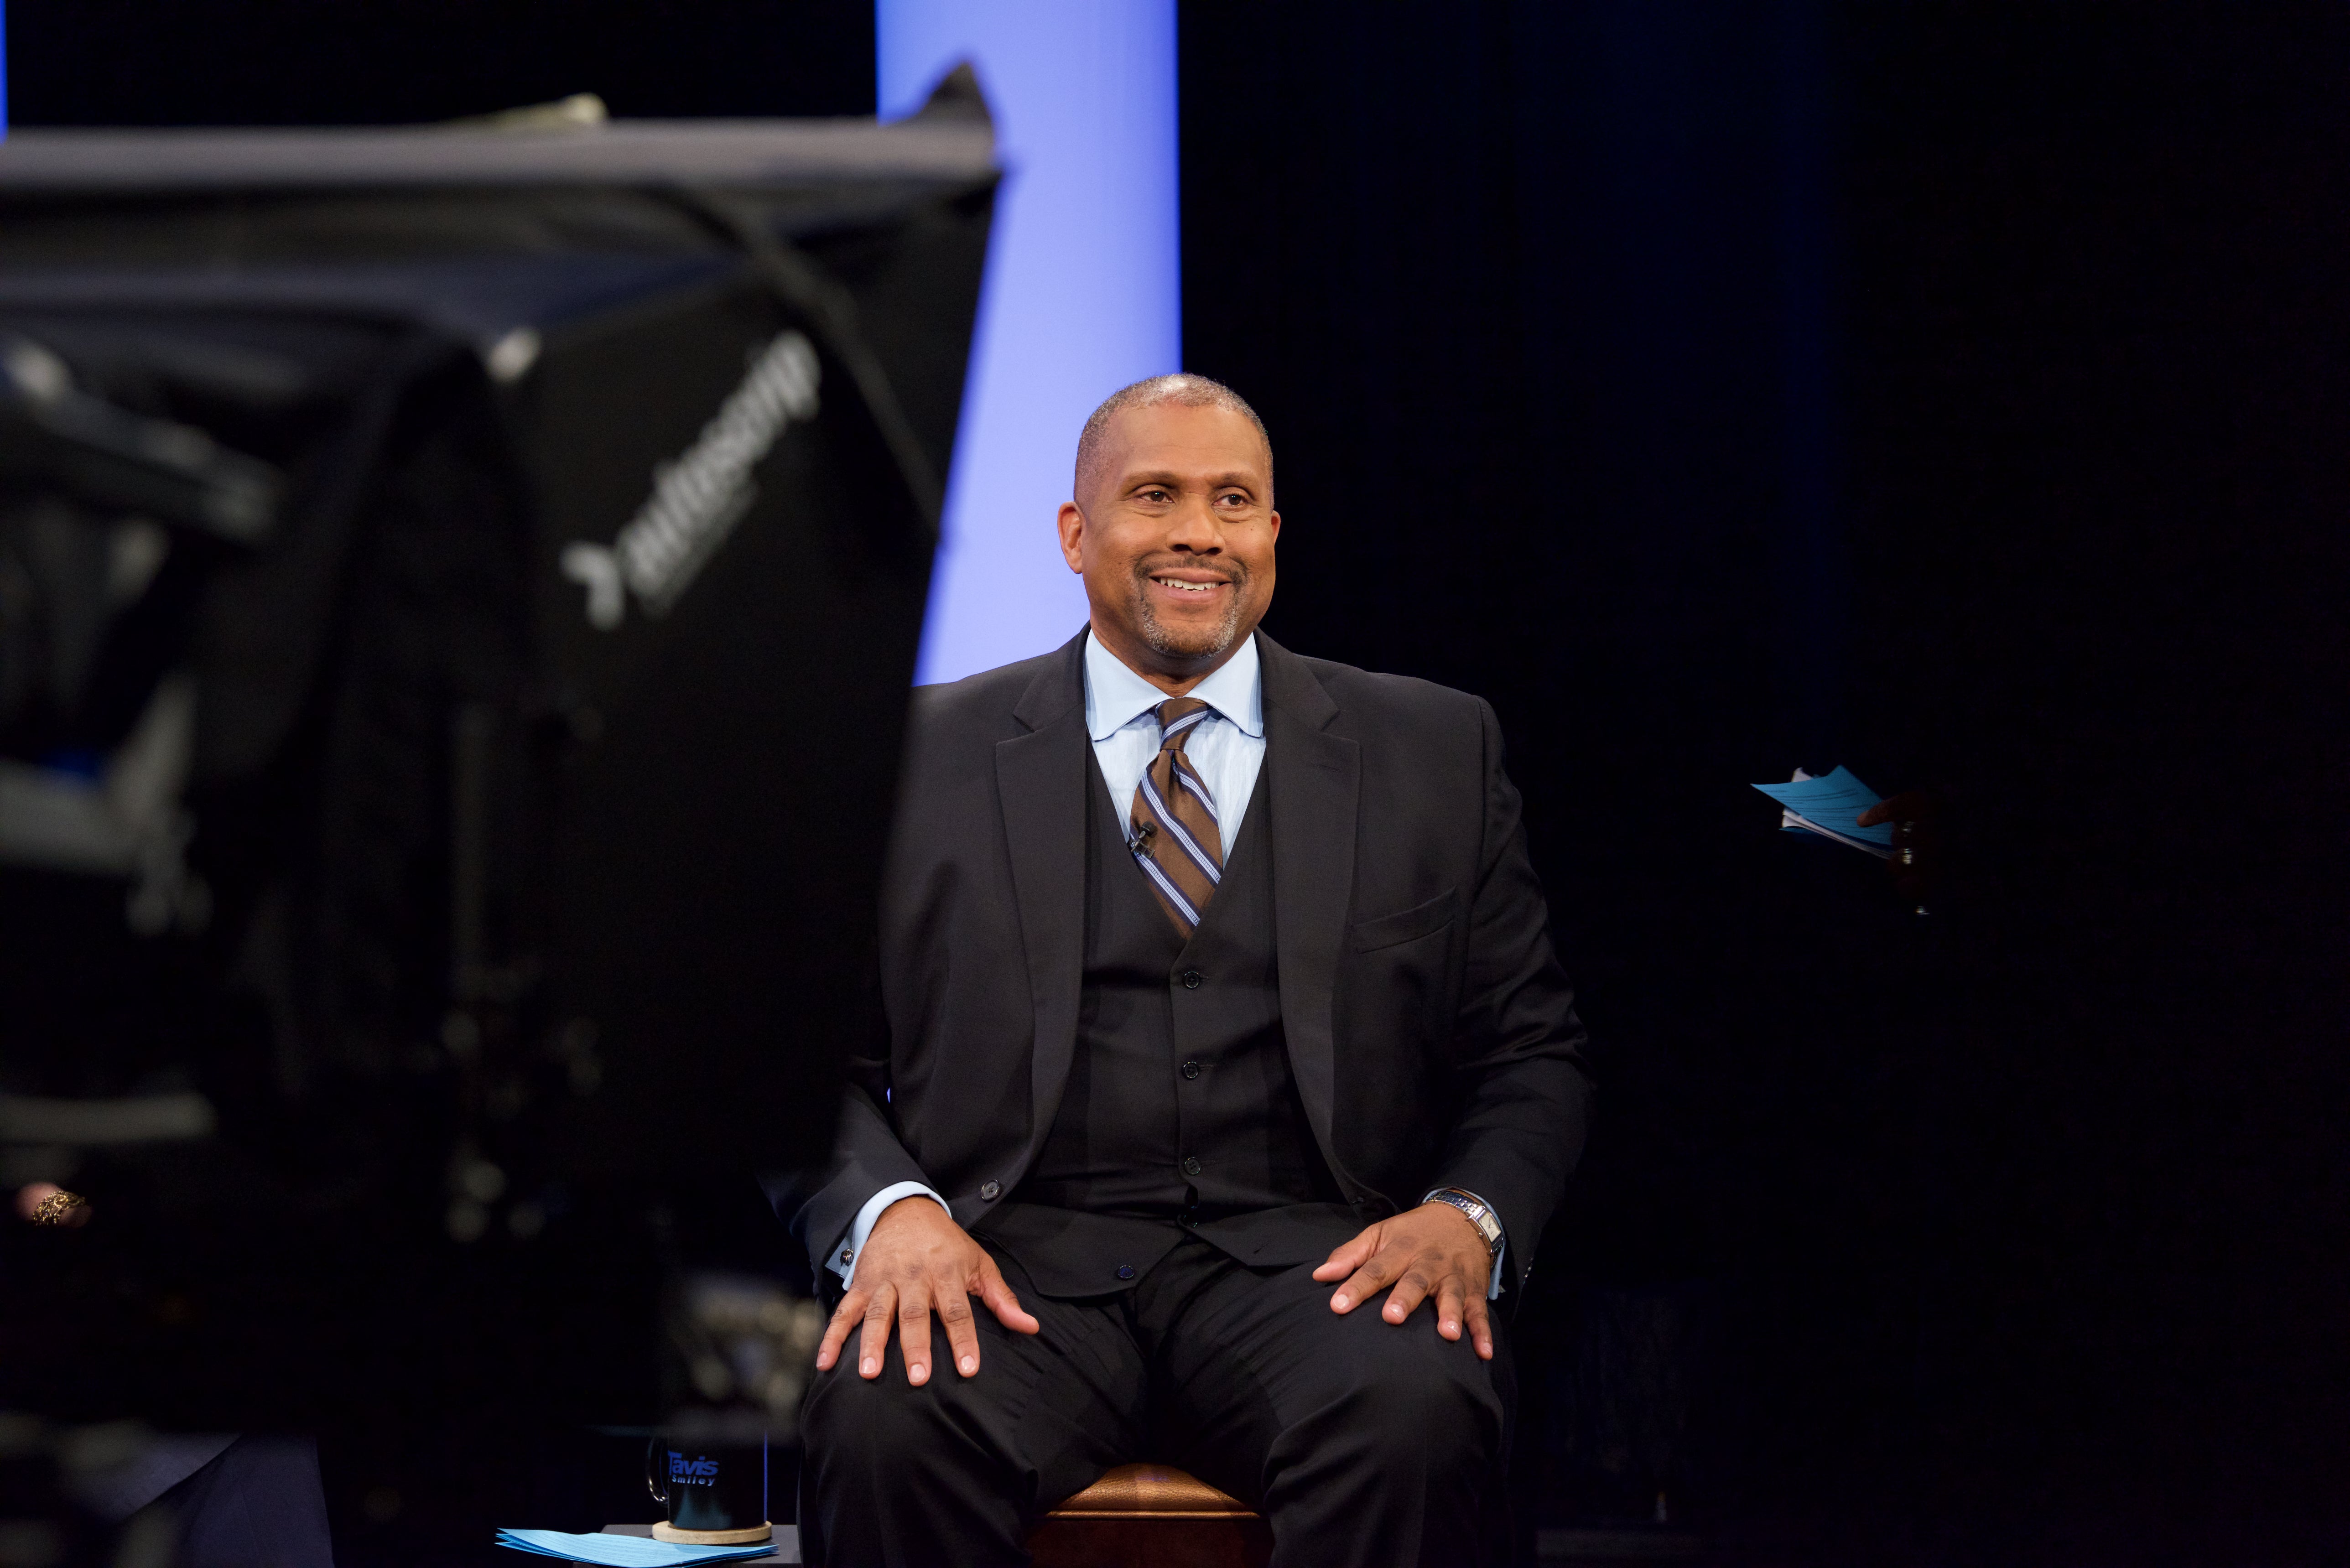 Tavis Smiley Is Trying To Defend Himself Against Allegations With A Press Tour. It's Not Going Well
